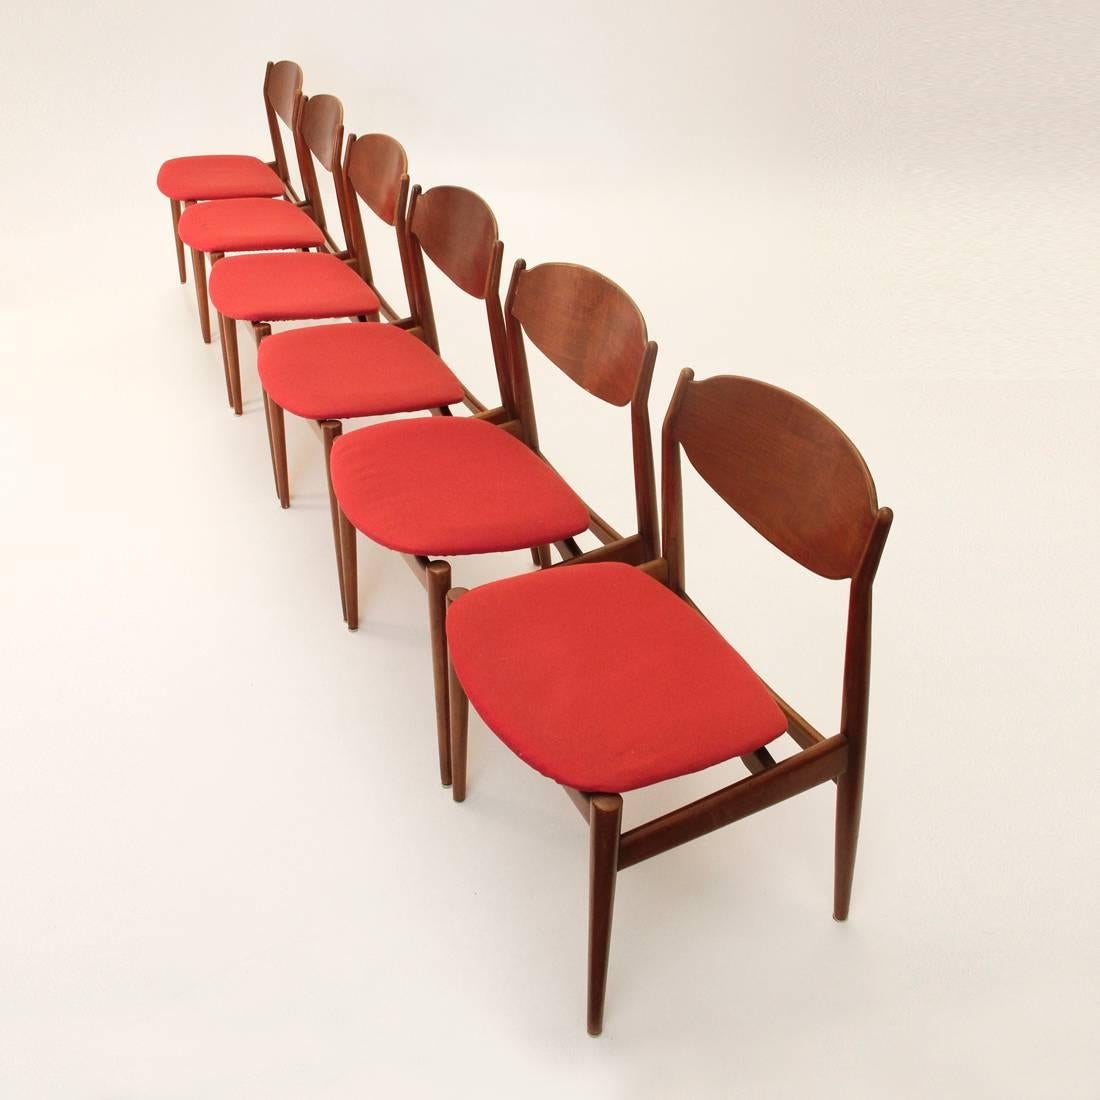 This set of six chairs were produced by ISA Bergamo in the 1960s. Each chair has a wooden frame with curved backs and a red upholstered seat with removable and washable lining. The chairs are in good vintage condition, with some wear on the wood.